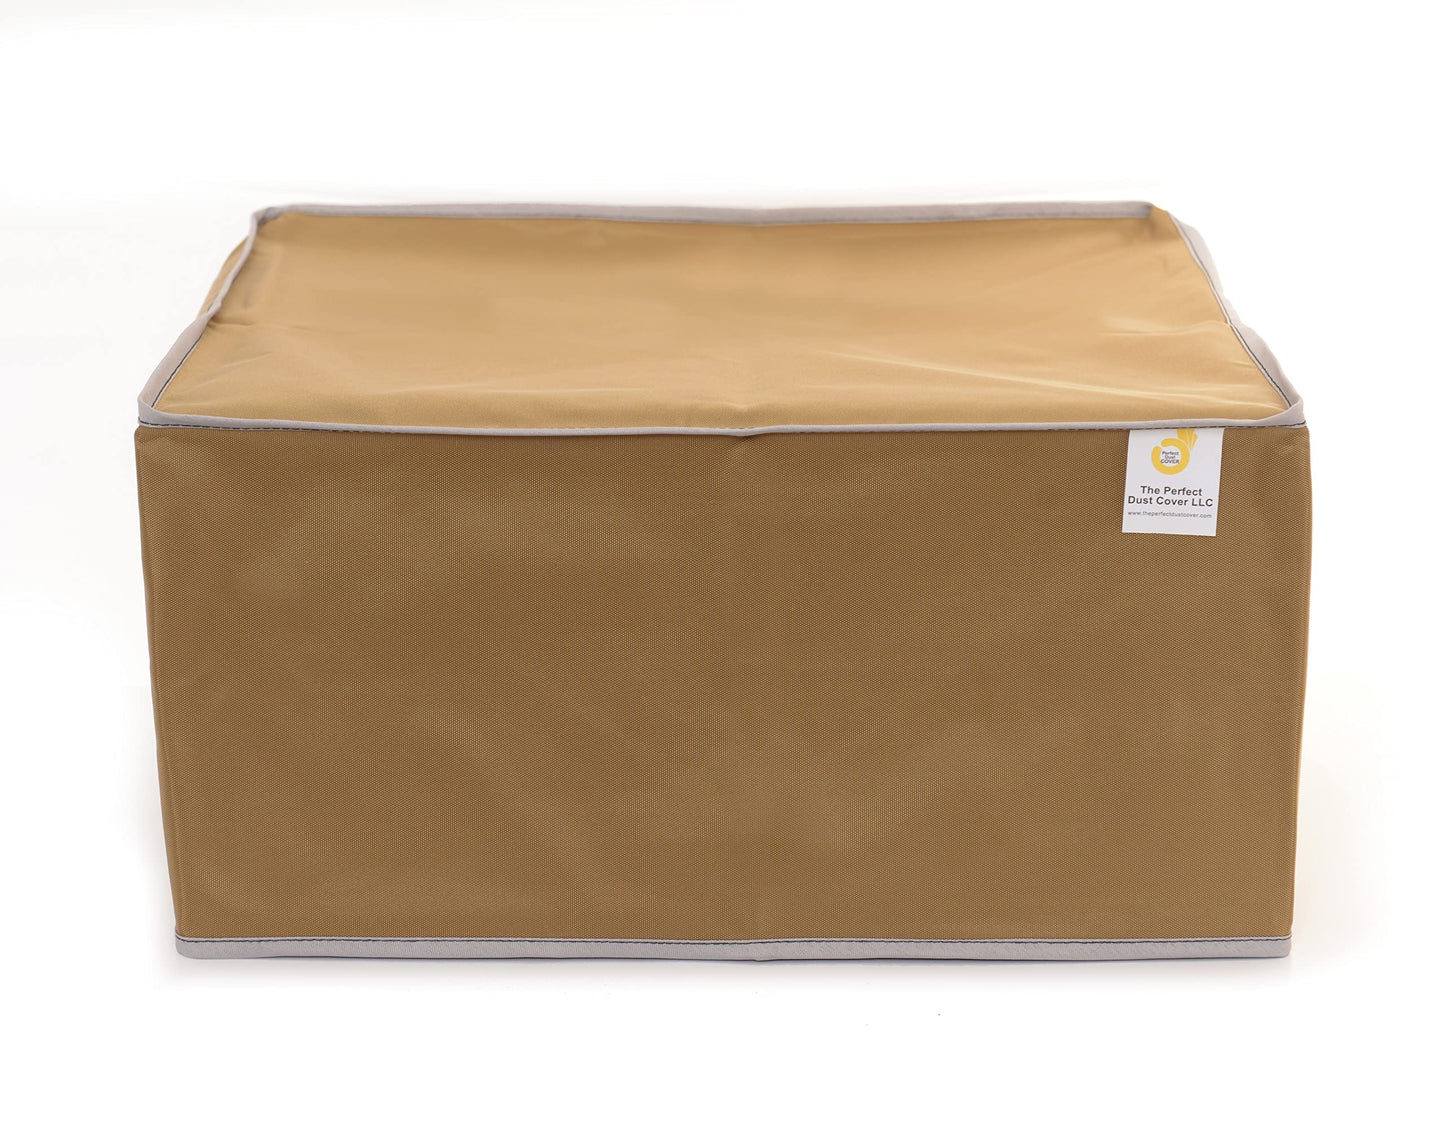 The Perfect Dust Cover, Tan Nylon Cover Compatible with Epson EcoTank ET-3843 All-in-One Supertank Printer, Anti Static and Waterproof Dust Cover by The Perfect Dust Cover LLC